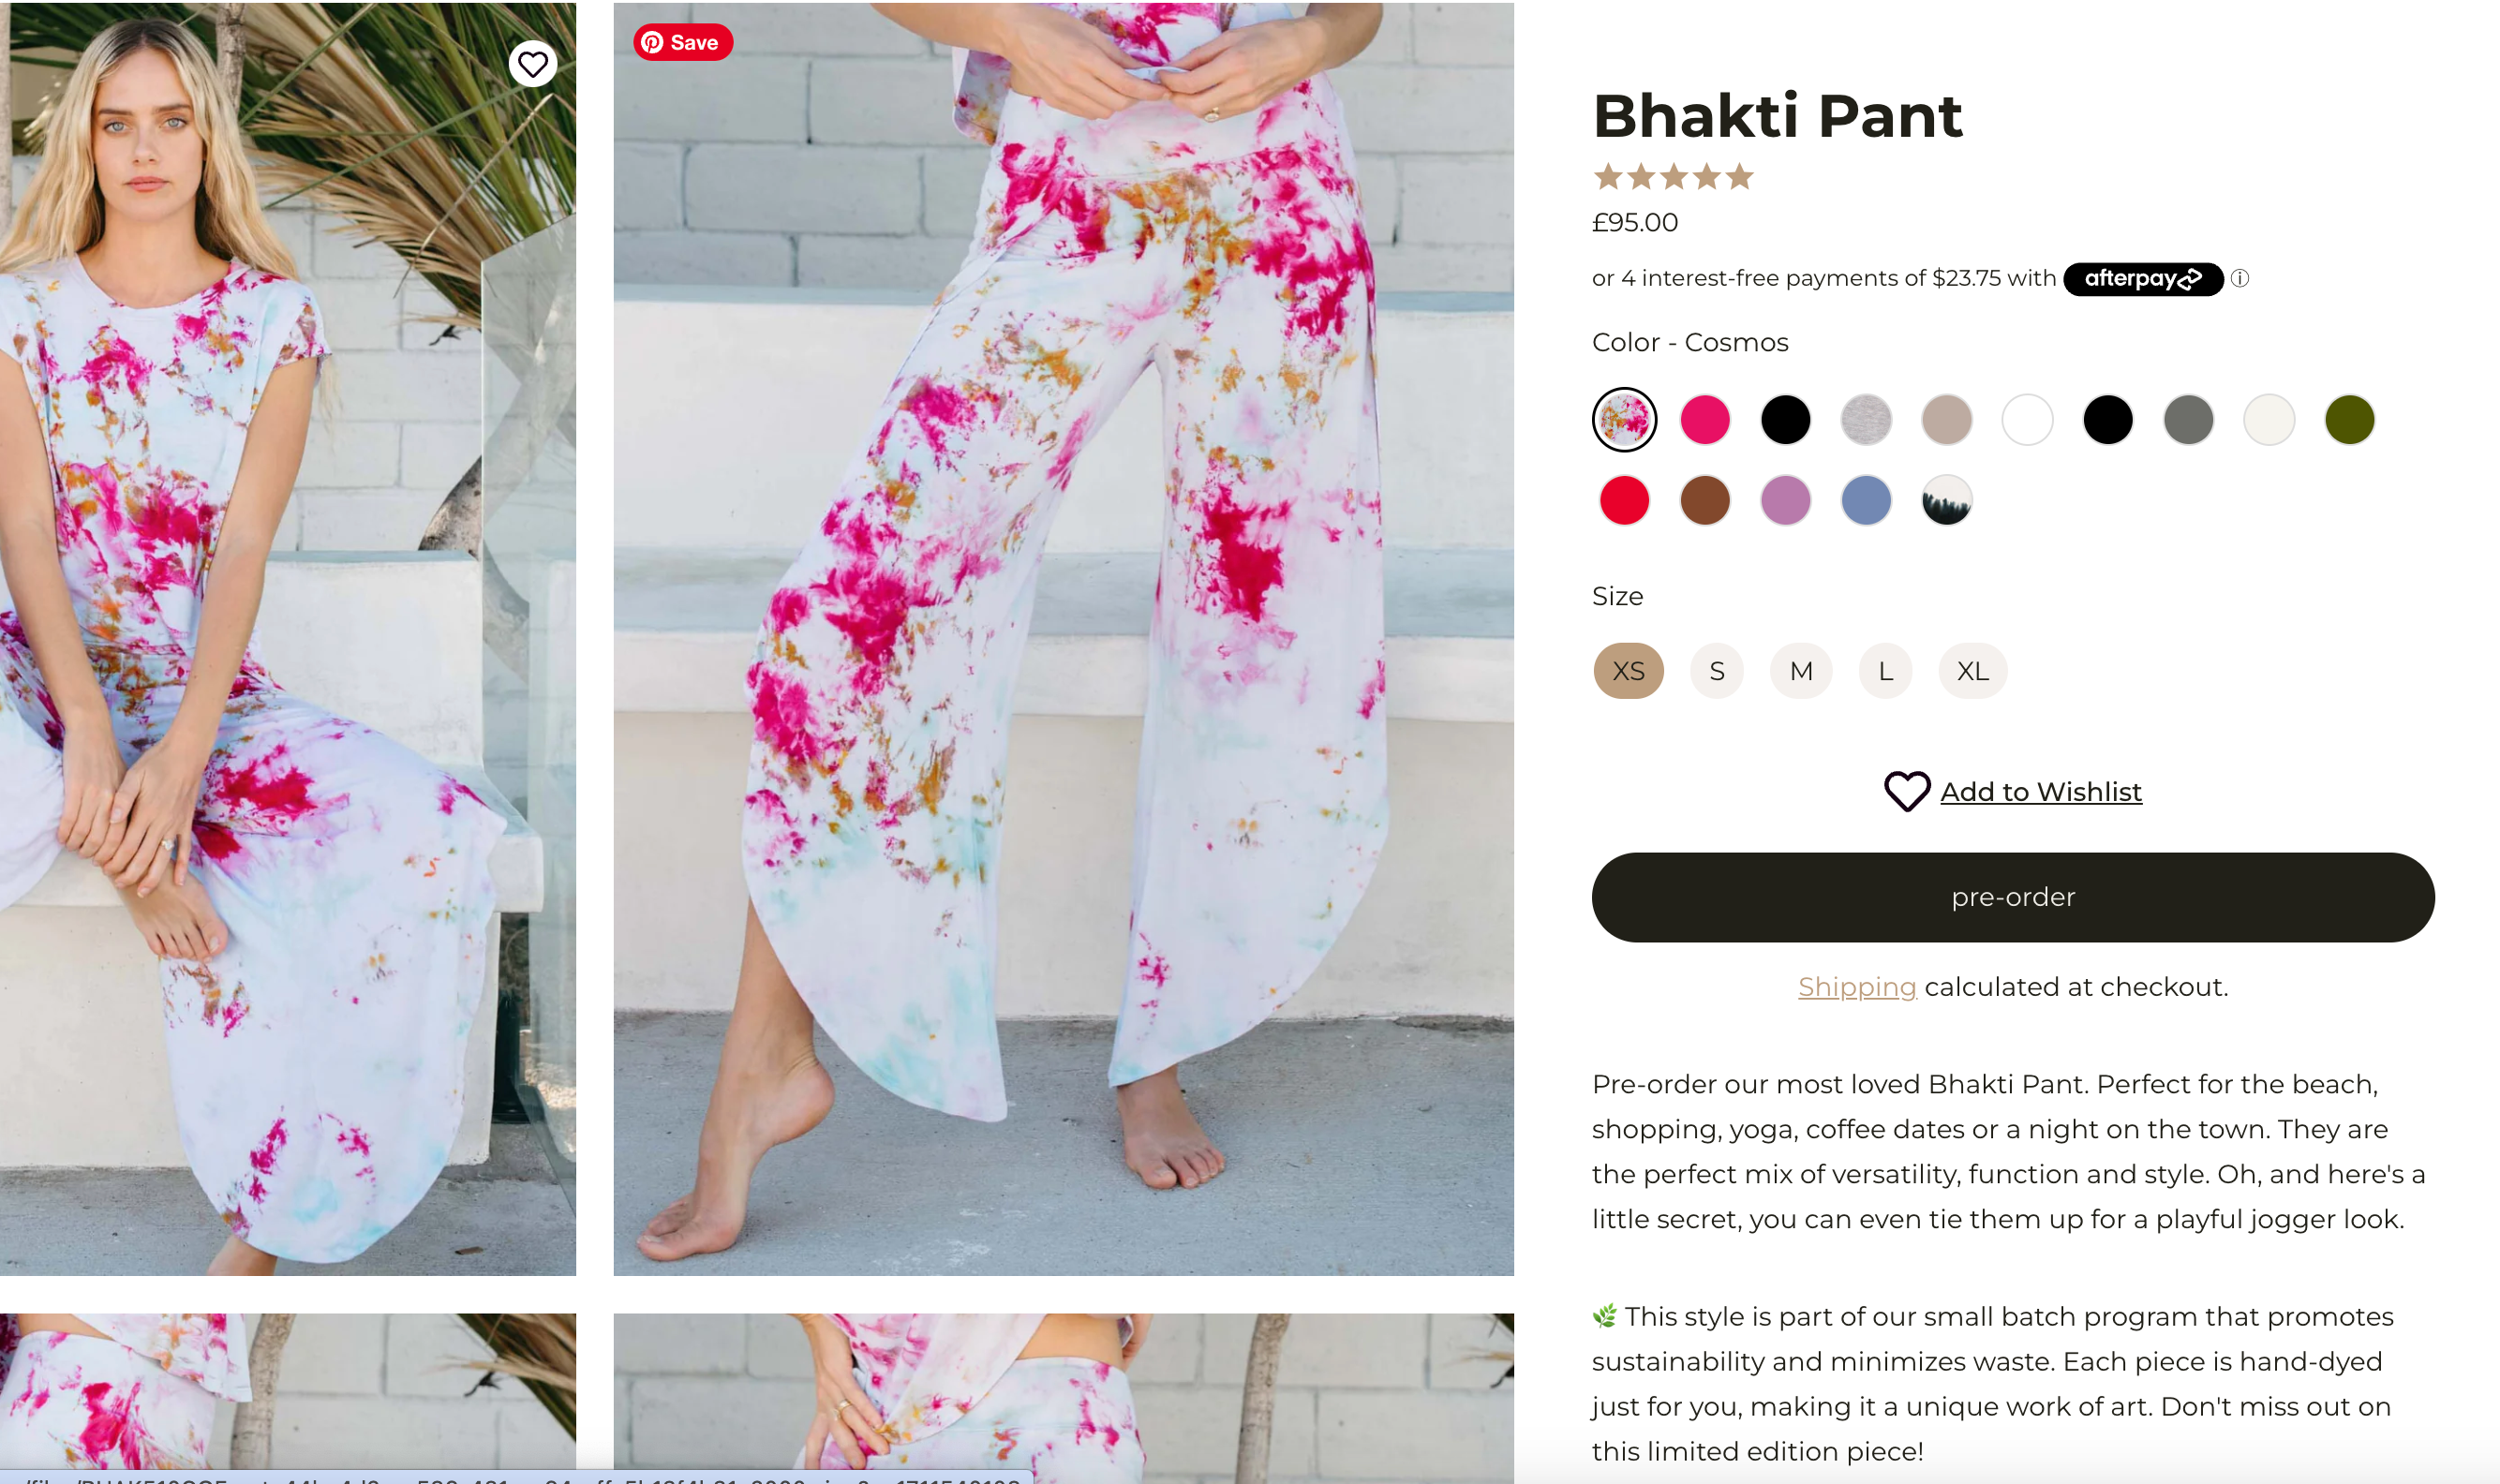 Charge-later pre-orders for Bhakti pant